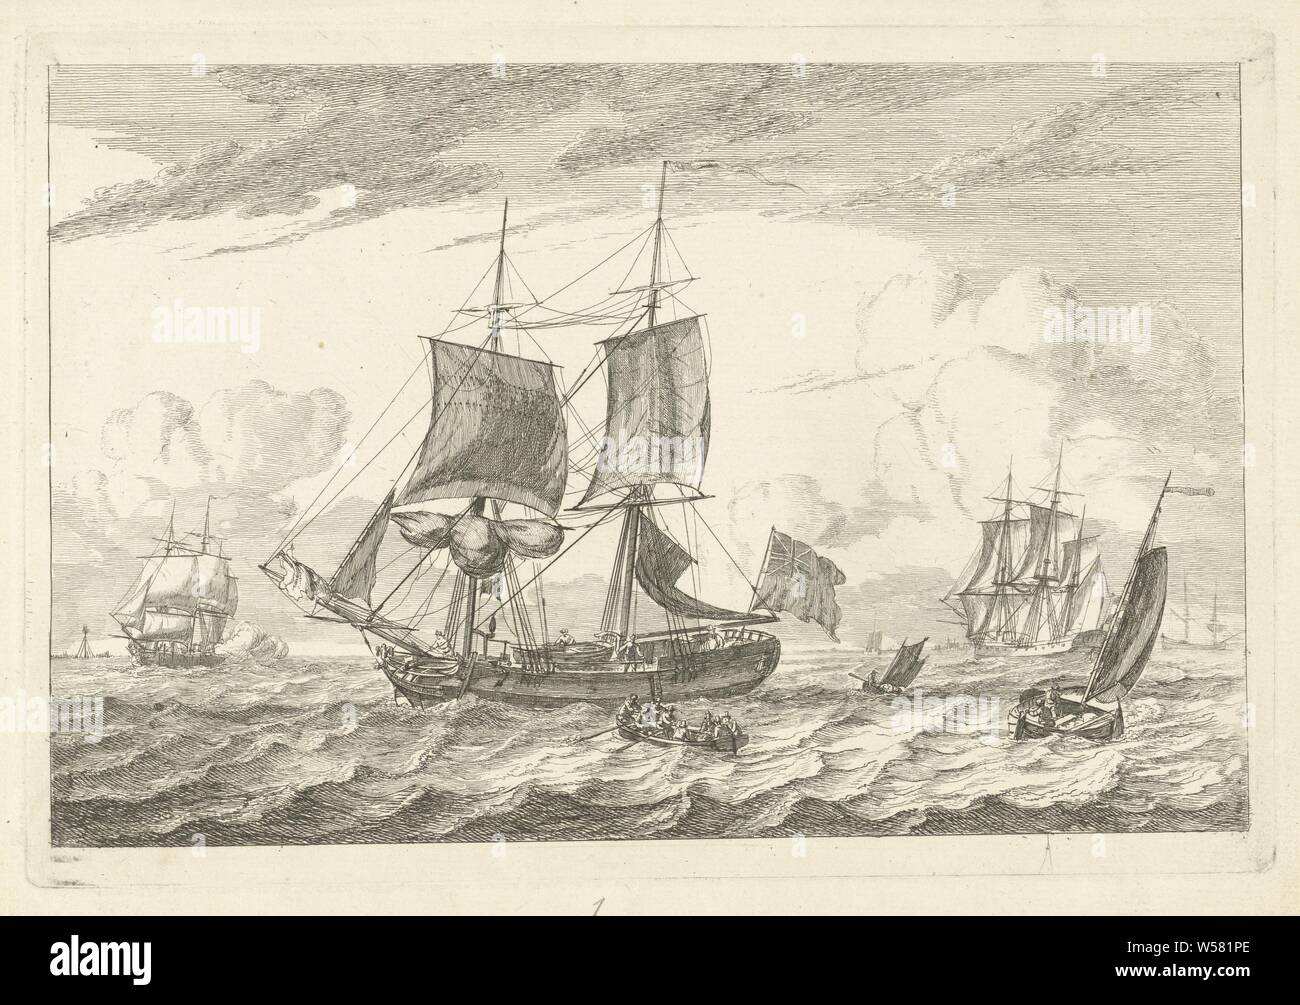 English two-mast on rough water Various ships (series title), Various sailing ships on turbulent water. In the foreground a two-master with an English flag. There is a sloop on the deck of the boat. A rowing boat with eight figures is shown next to the two-master. This print is part of a series of five prints with different ships on open water., Rowing-boat, canoe, etc., ships (in general), Gerrit Groenewegen, Rotterdam, in or before 1793, paper, engraving, h 182 mm × w 269 mm Stock Photo